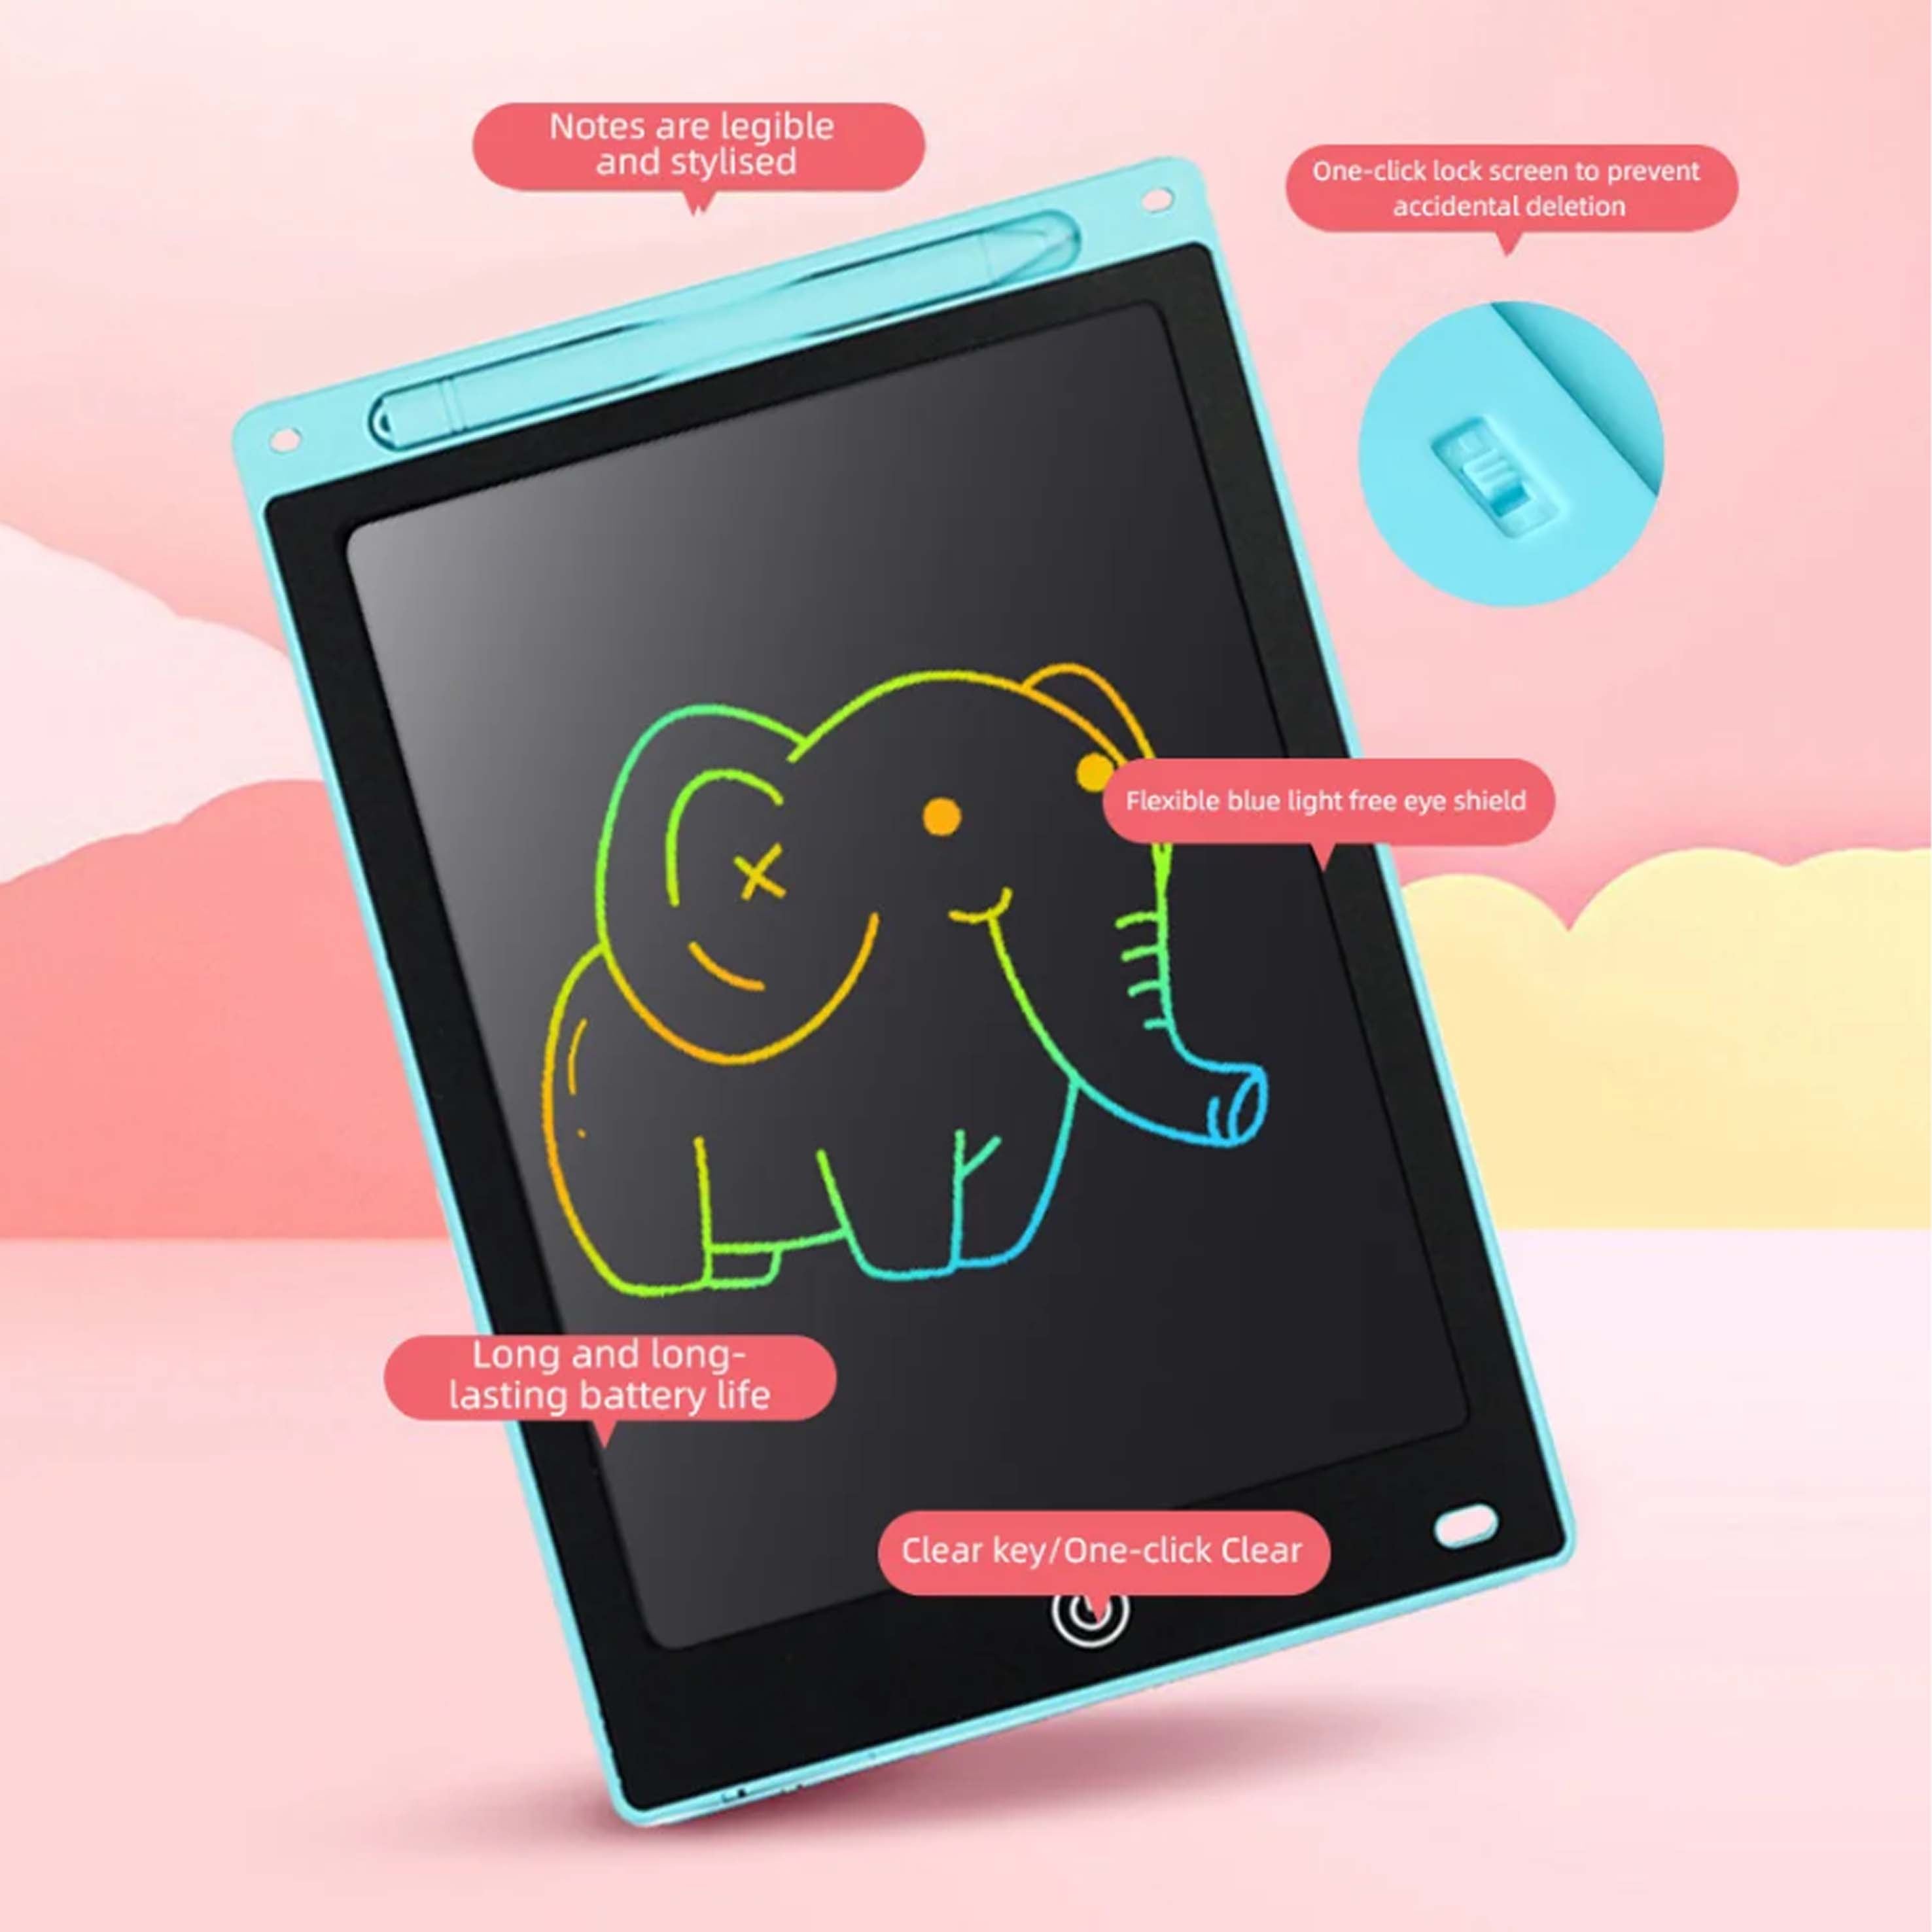 iCanvas: Electronic Drawing Tablet